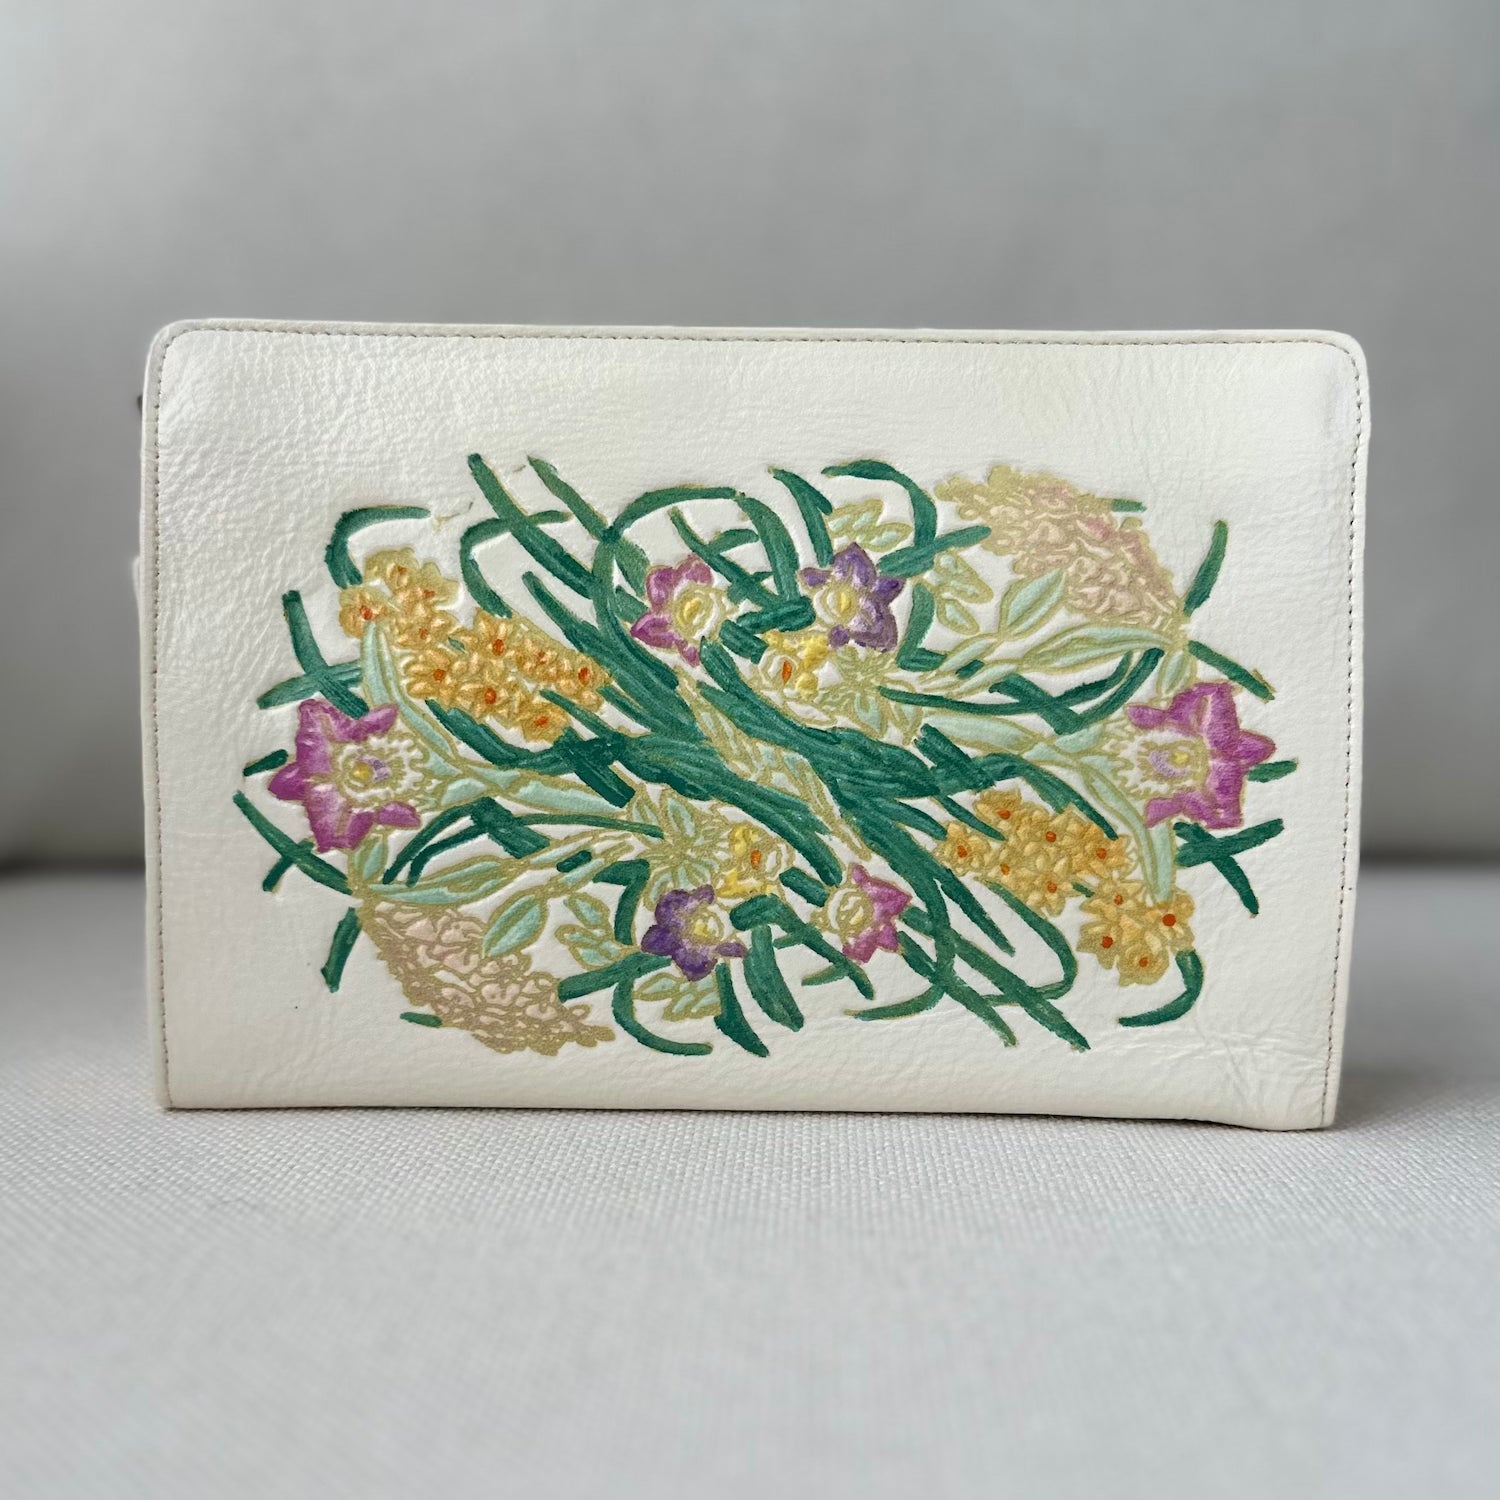 White Leather Floral Clutch